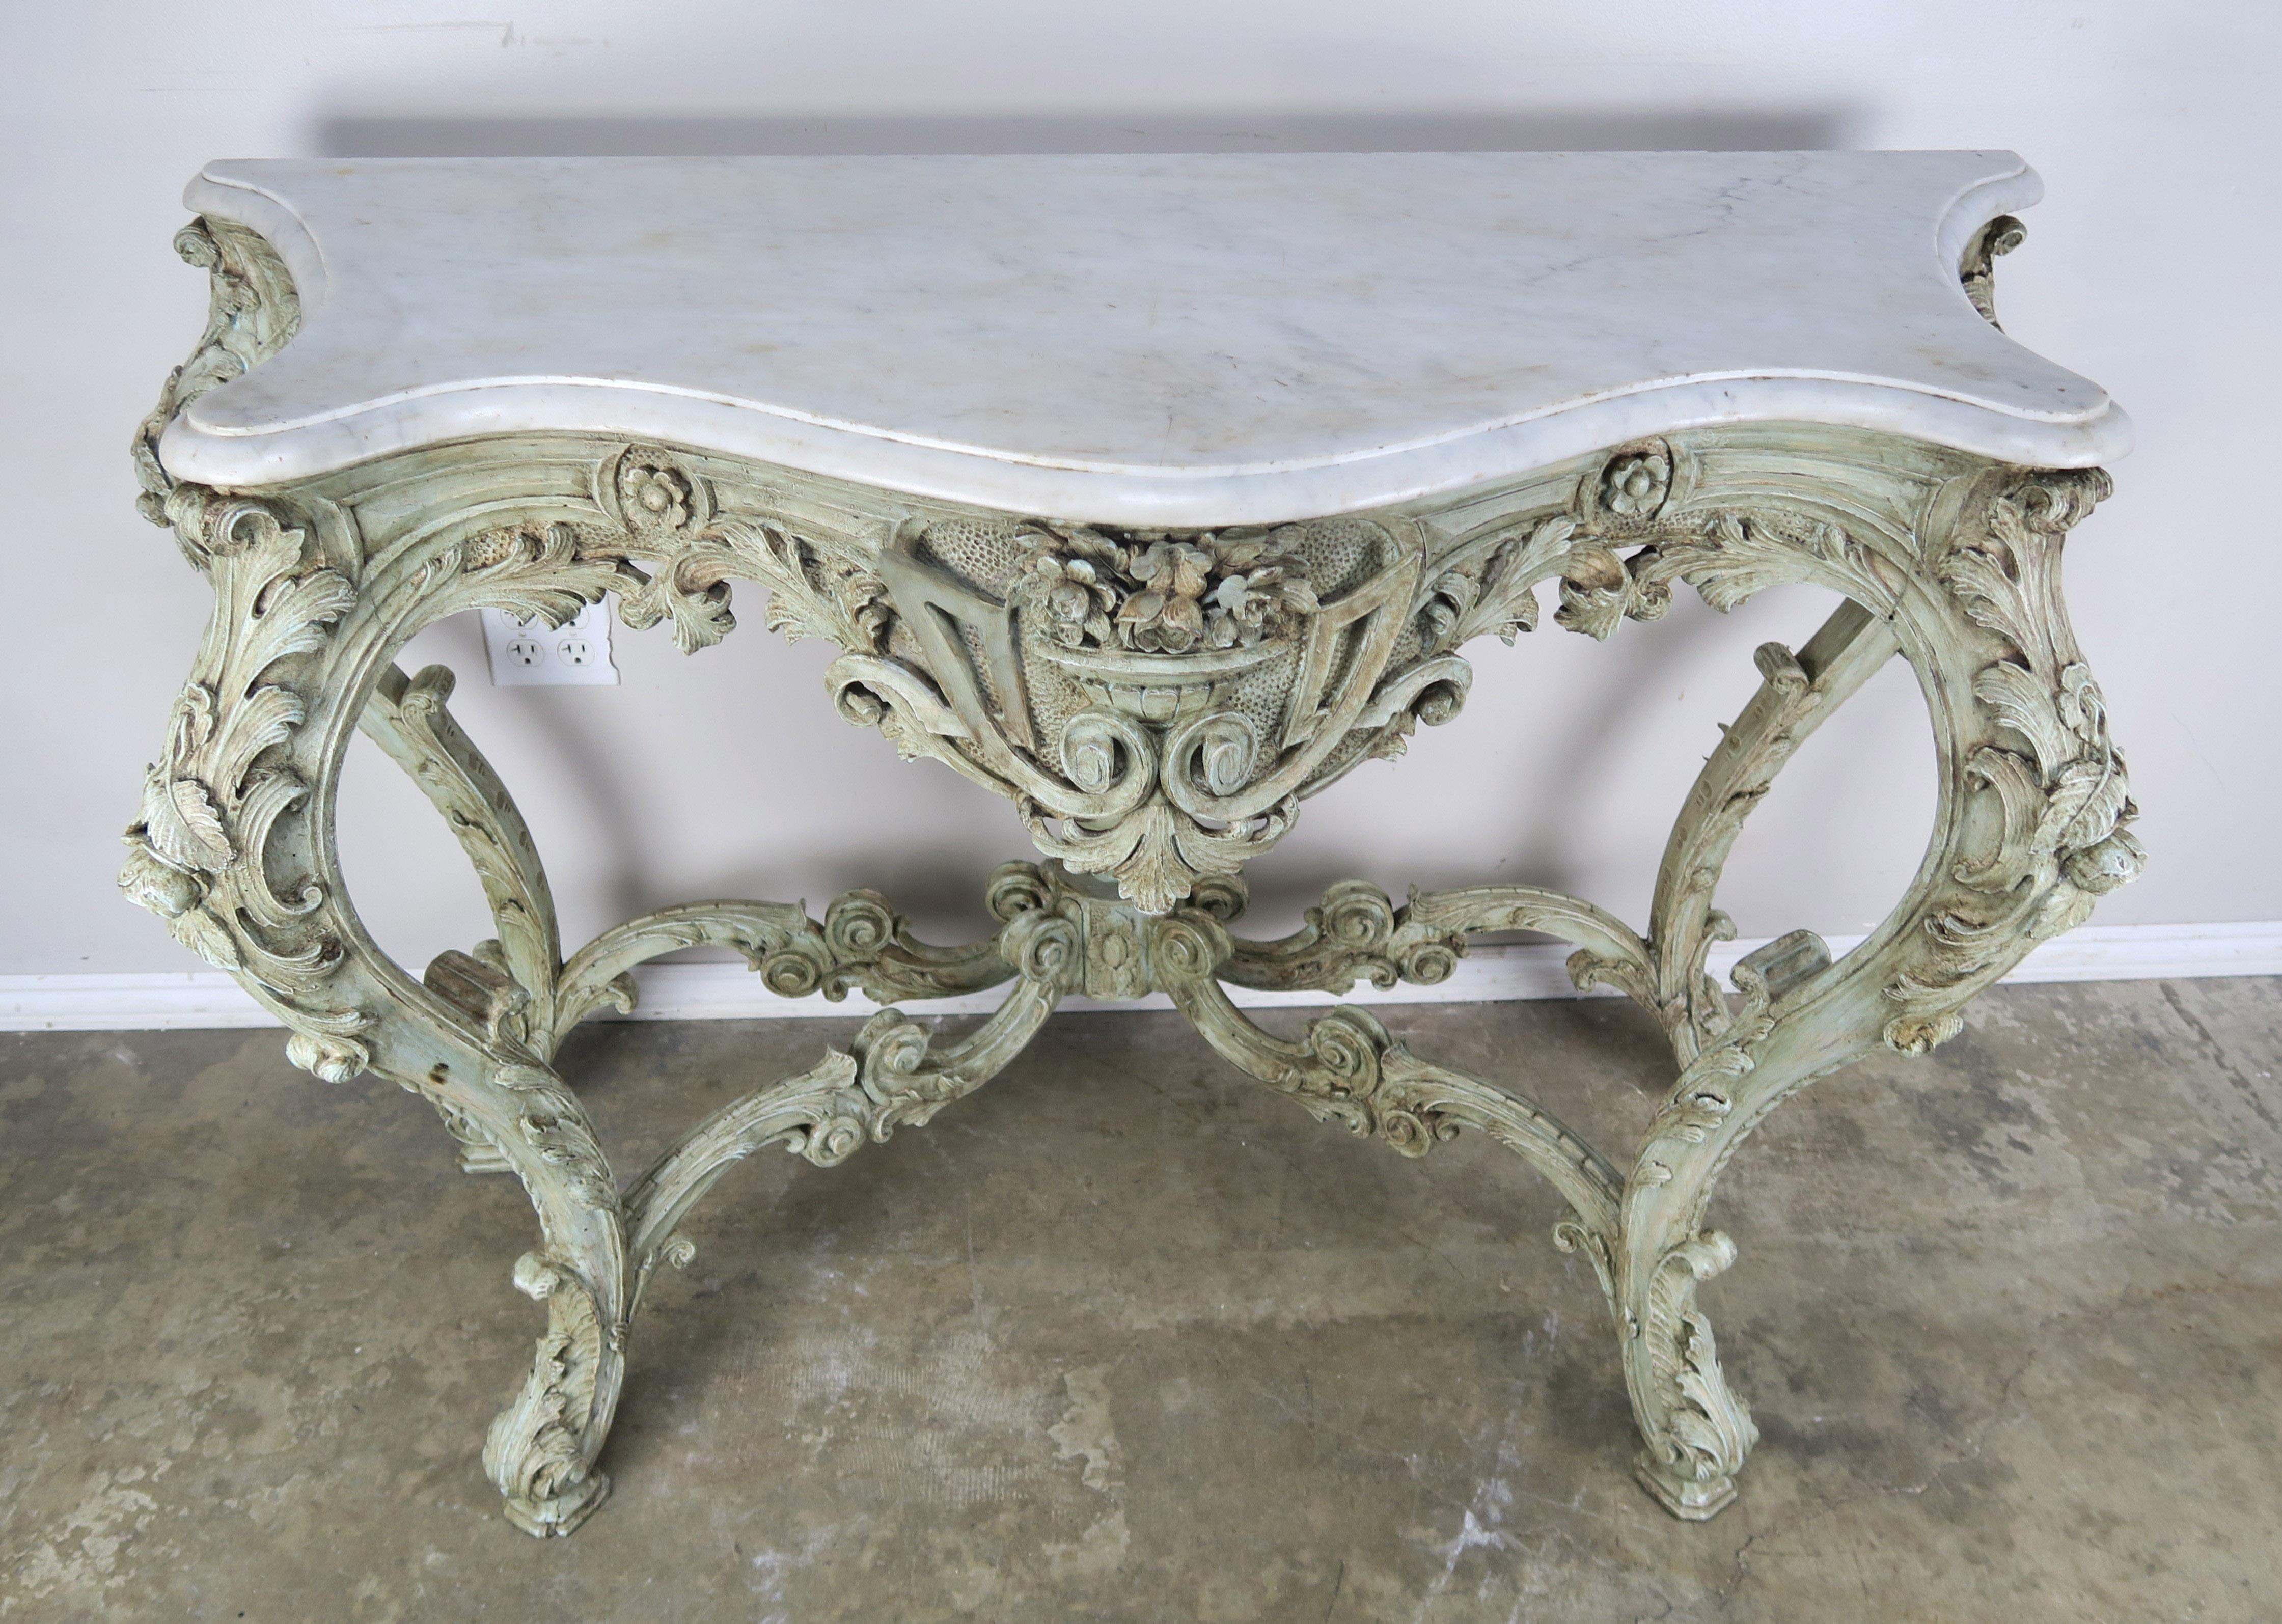 Hand-Painted 19th Century French Rococo Style Painted Console with Carrara Marble Top